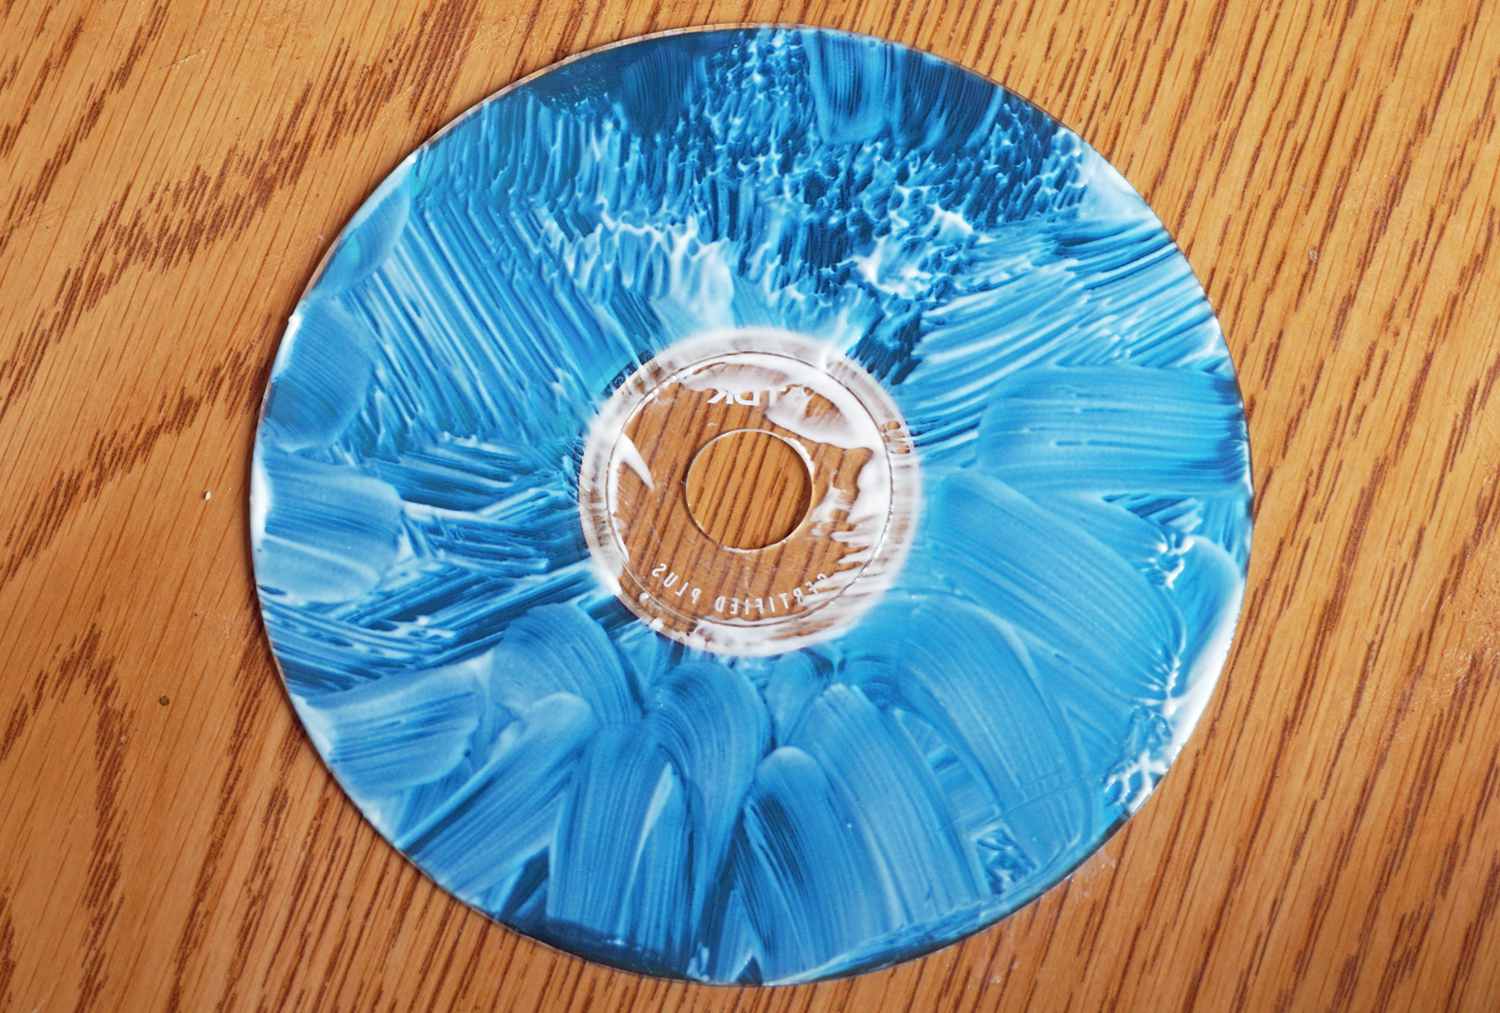 Scratched CD Covered in Polish